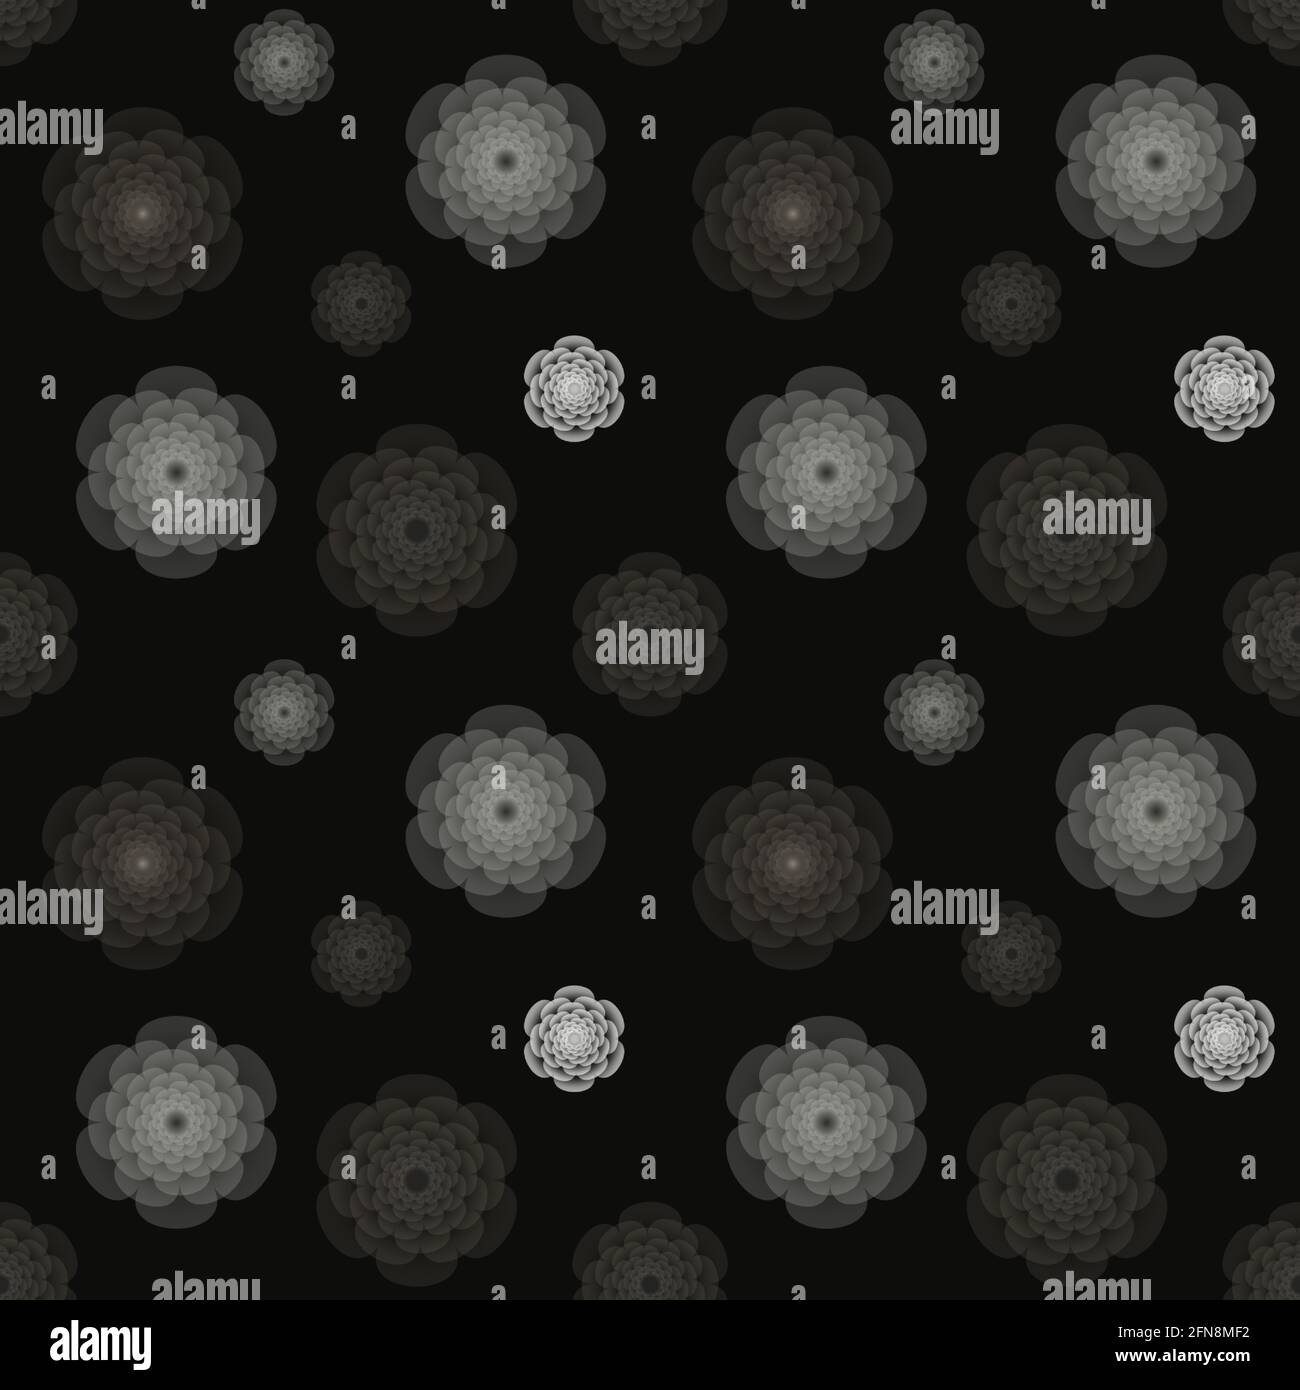 Seamless repeating pattern. Peony flowers in shades of gray on black background. Elegant and gothic. Stock Vector